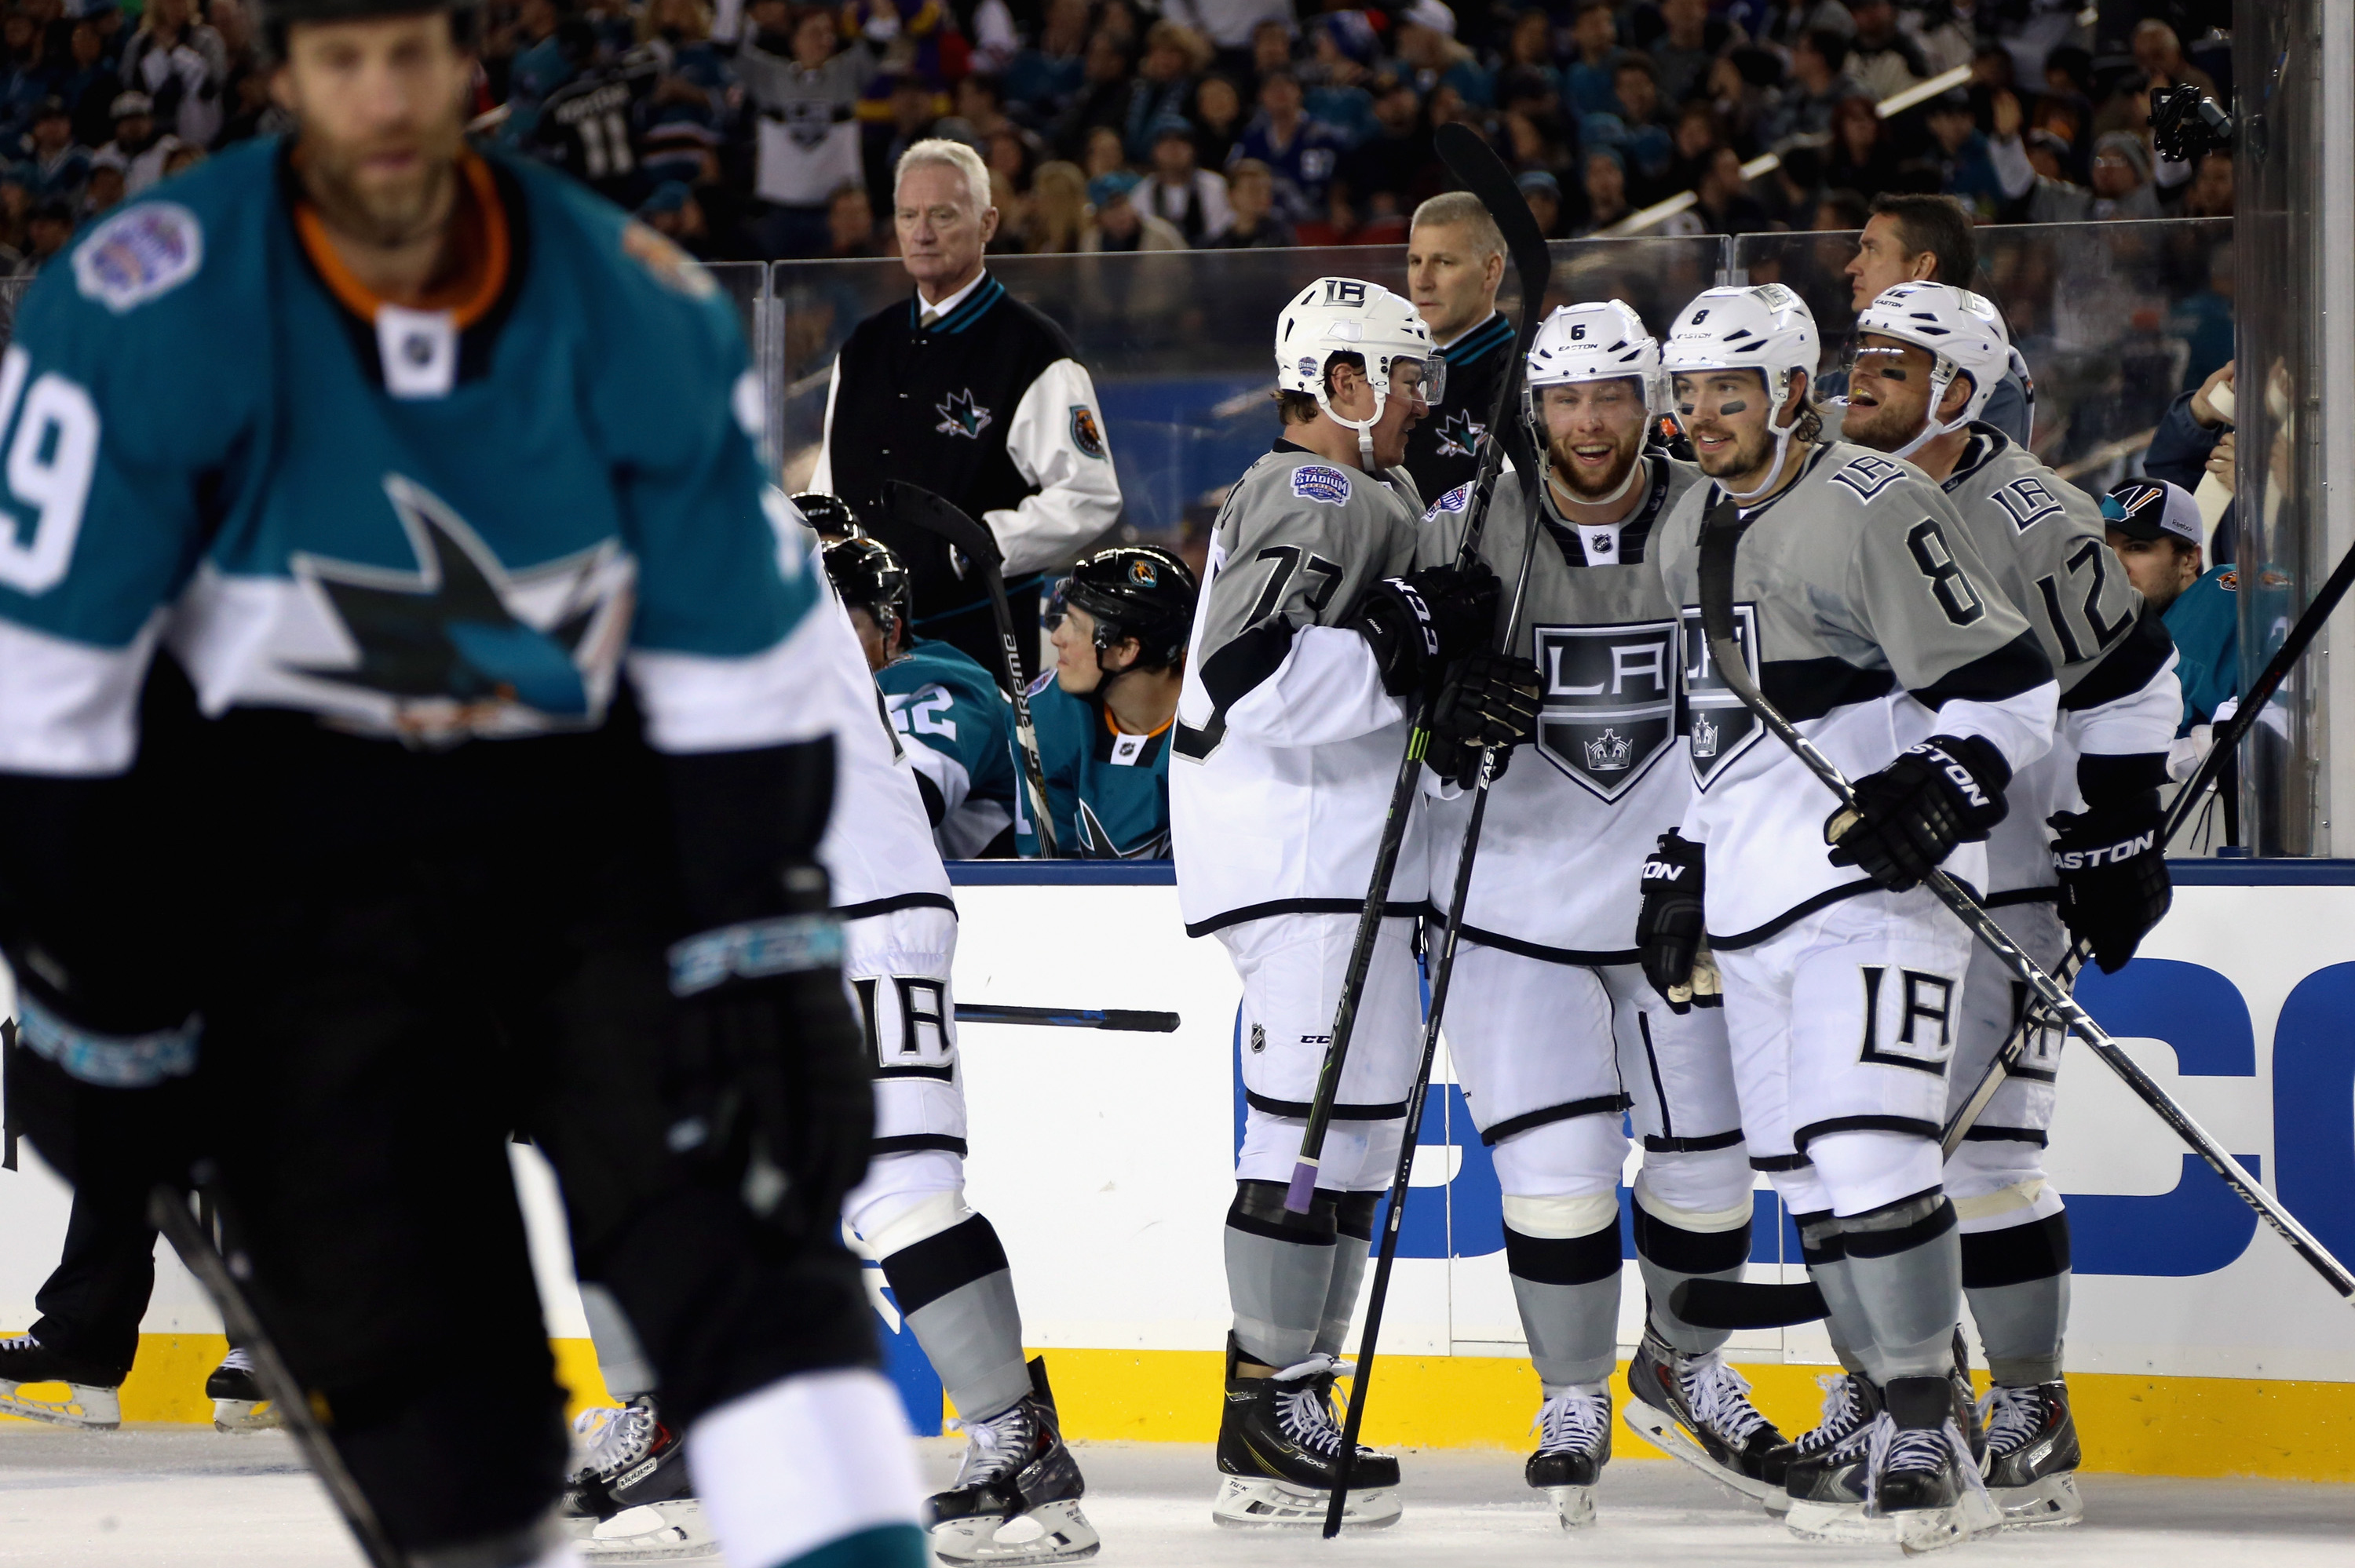 Sharks lose to Kings outdoors at Levi's Stadium 2-1